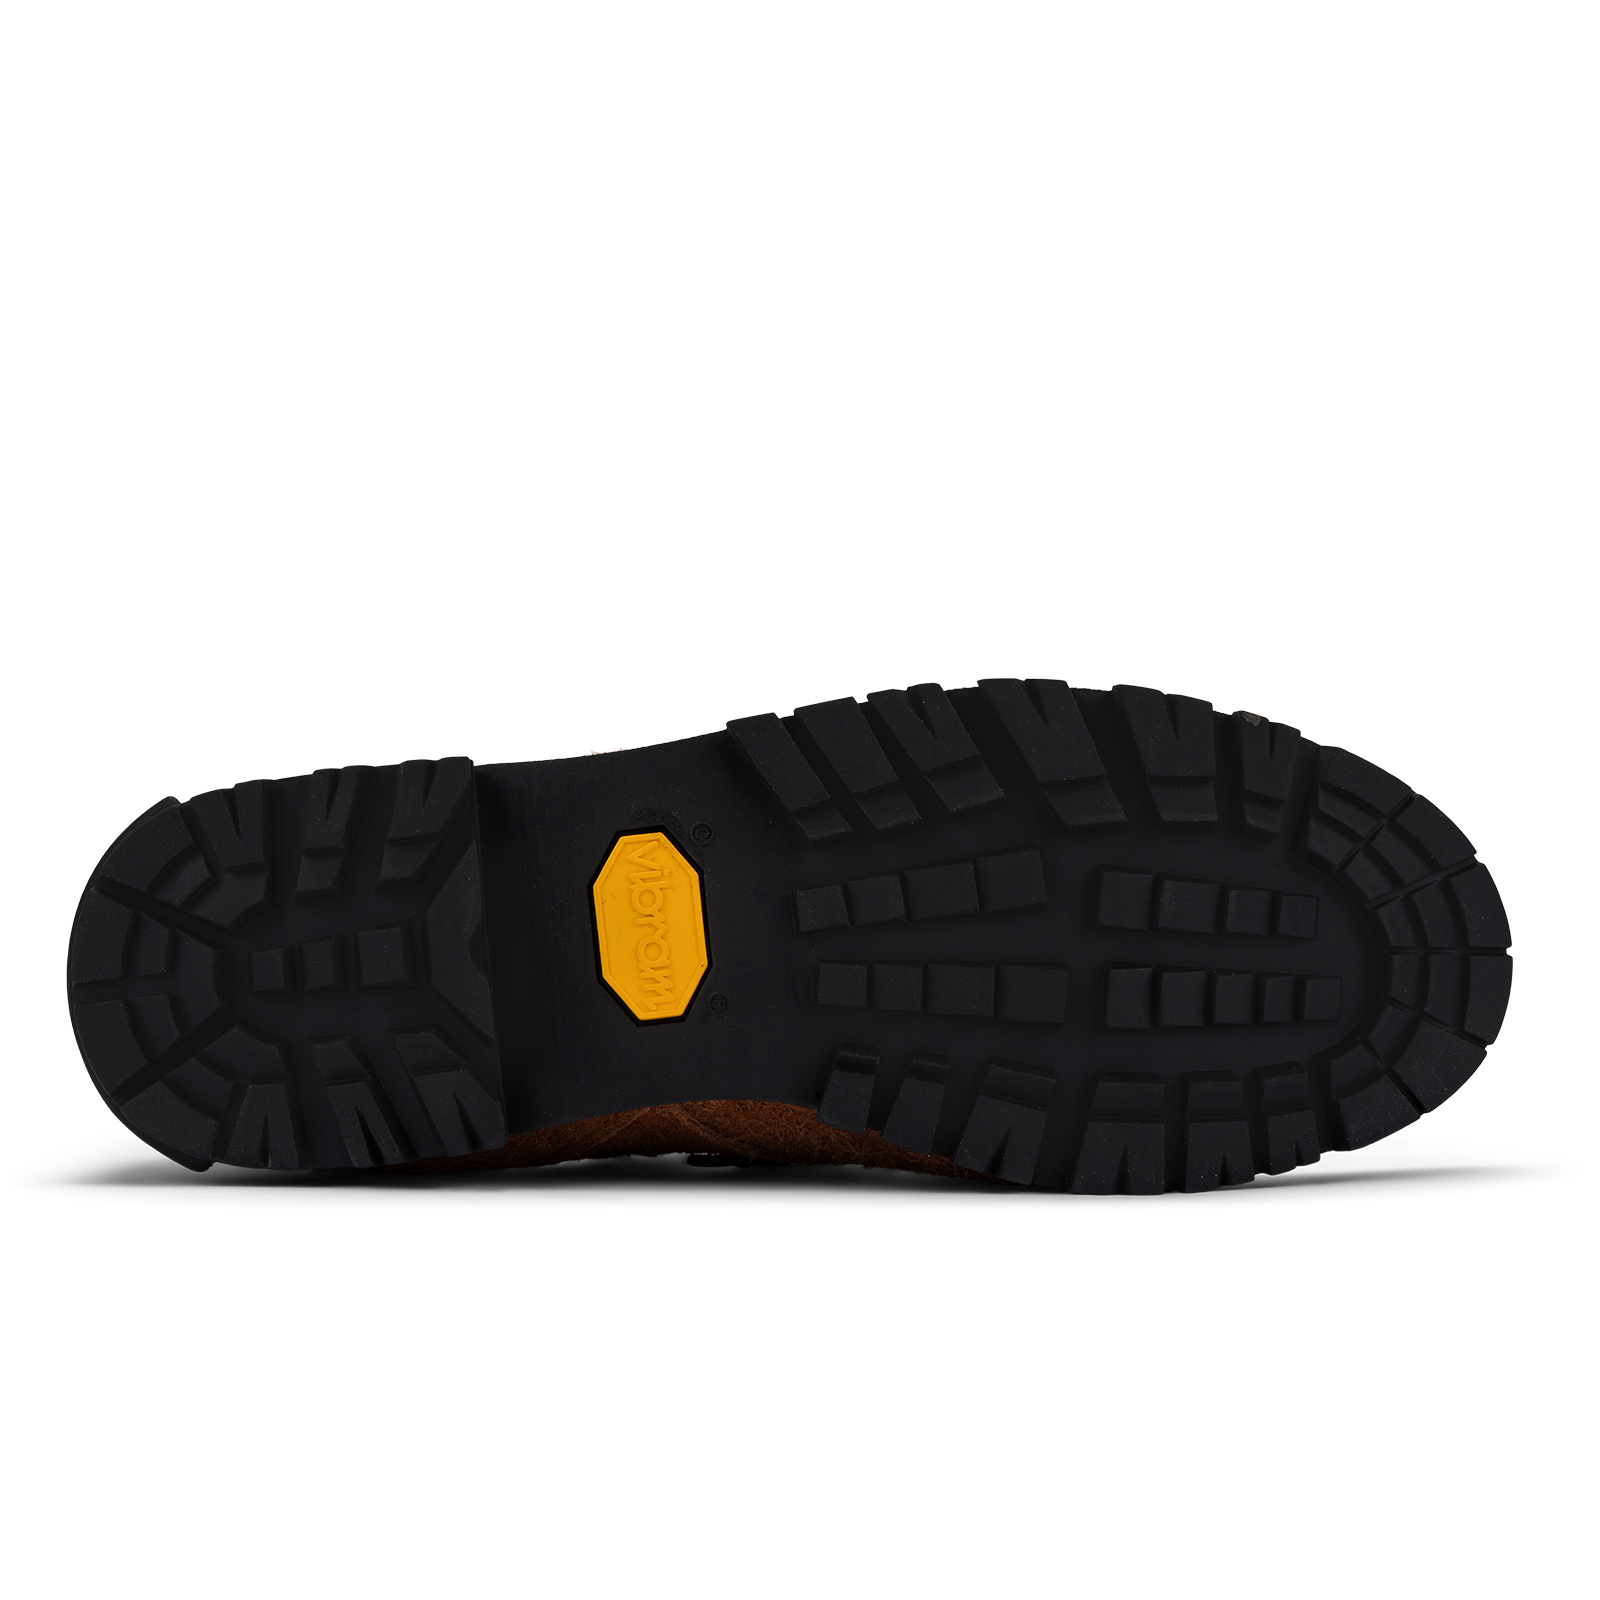 vibram sole  / Approach / Auburn color features tabaco colored hairy suede upper, gross grain webbing for laces. helastic heel detail, stretch mesh internal bootie, vintrage vibram hiking outsole and eva midsole. 